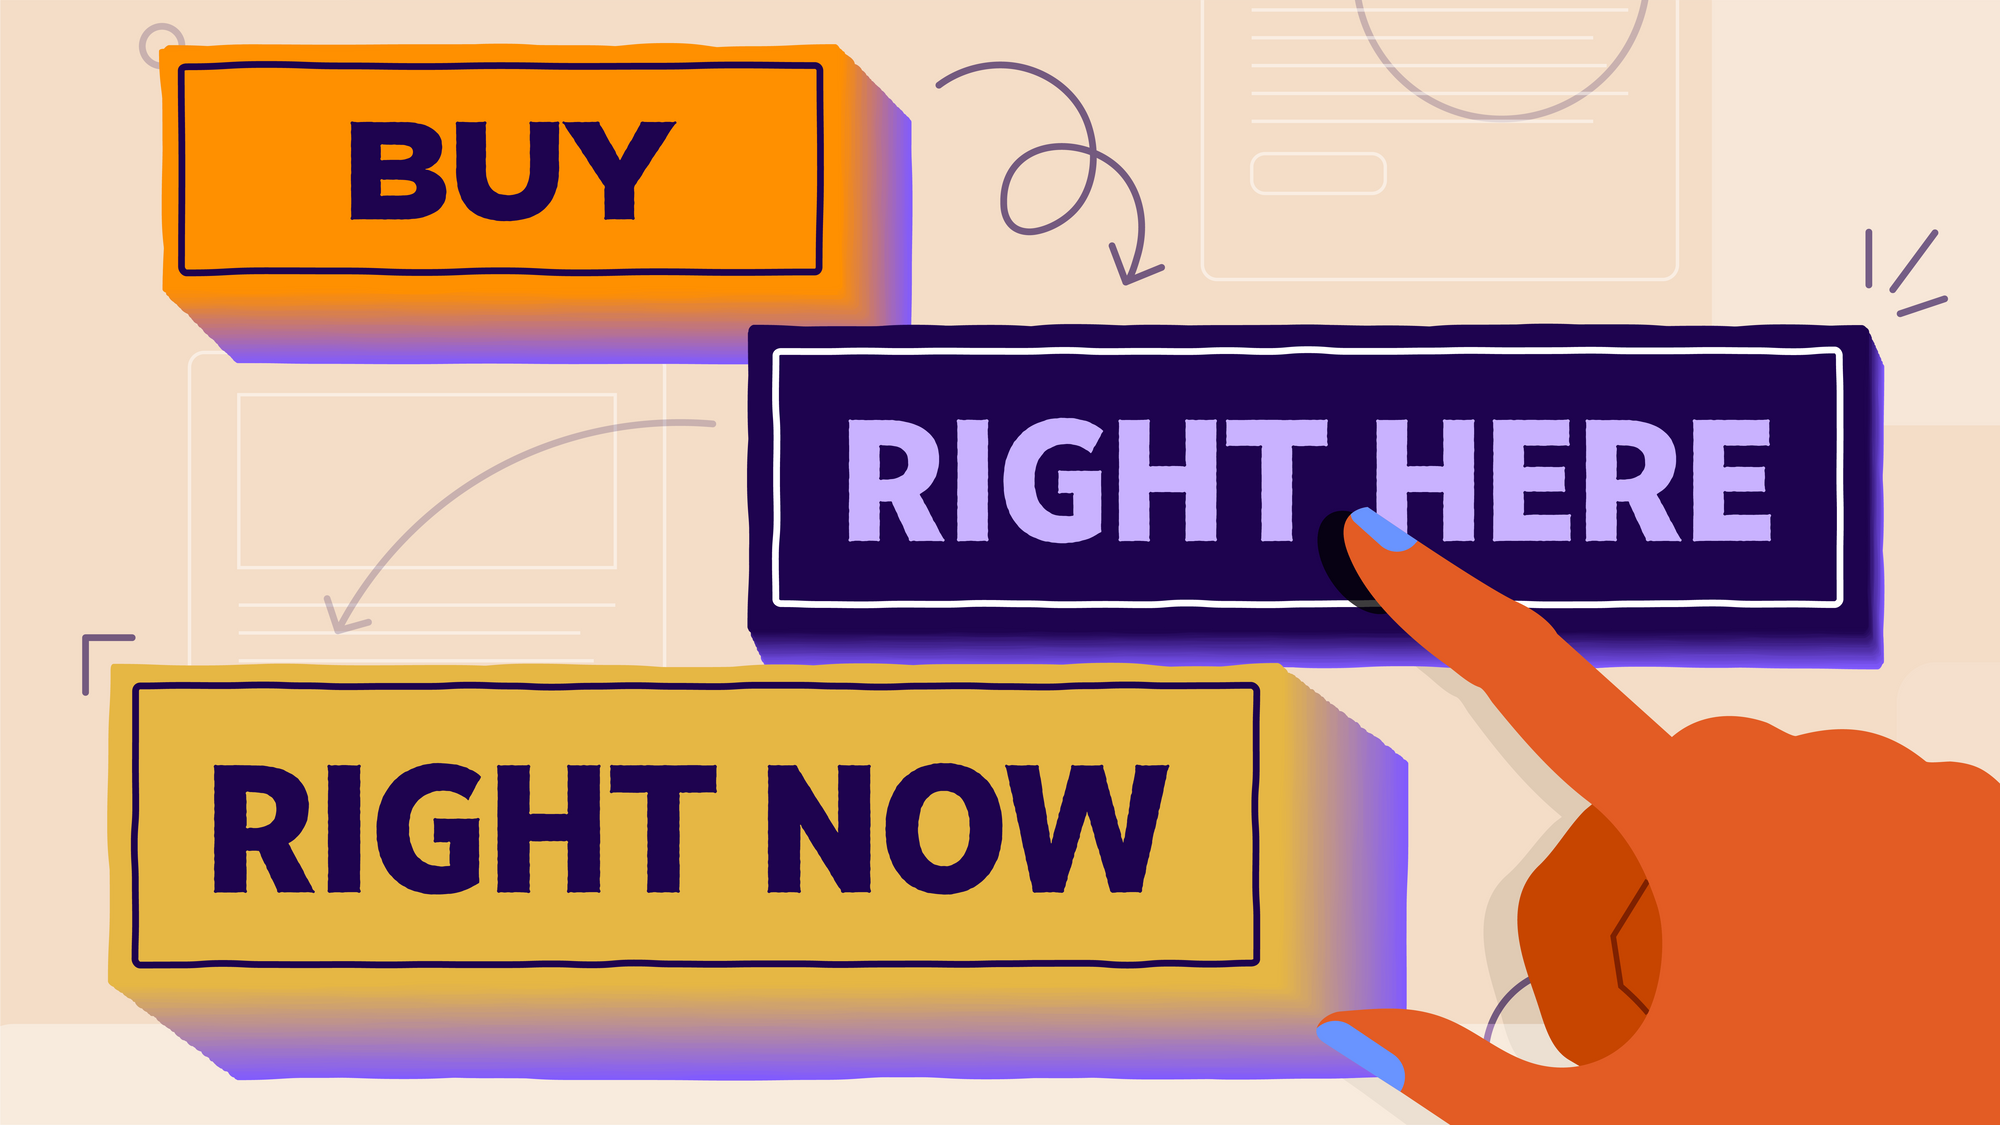 An abstract finger tapping on buttons labelled "buy", "right here", and "right now".